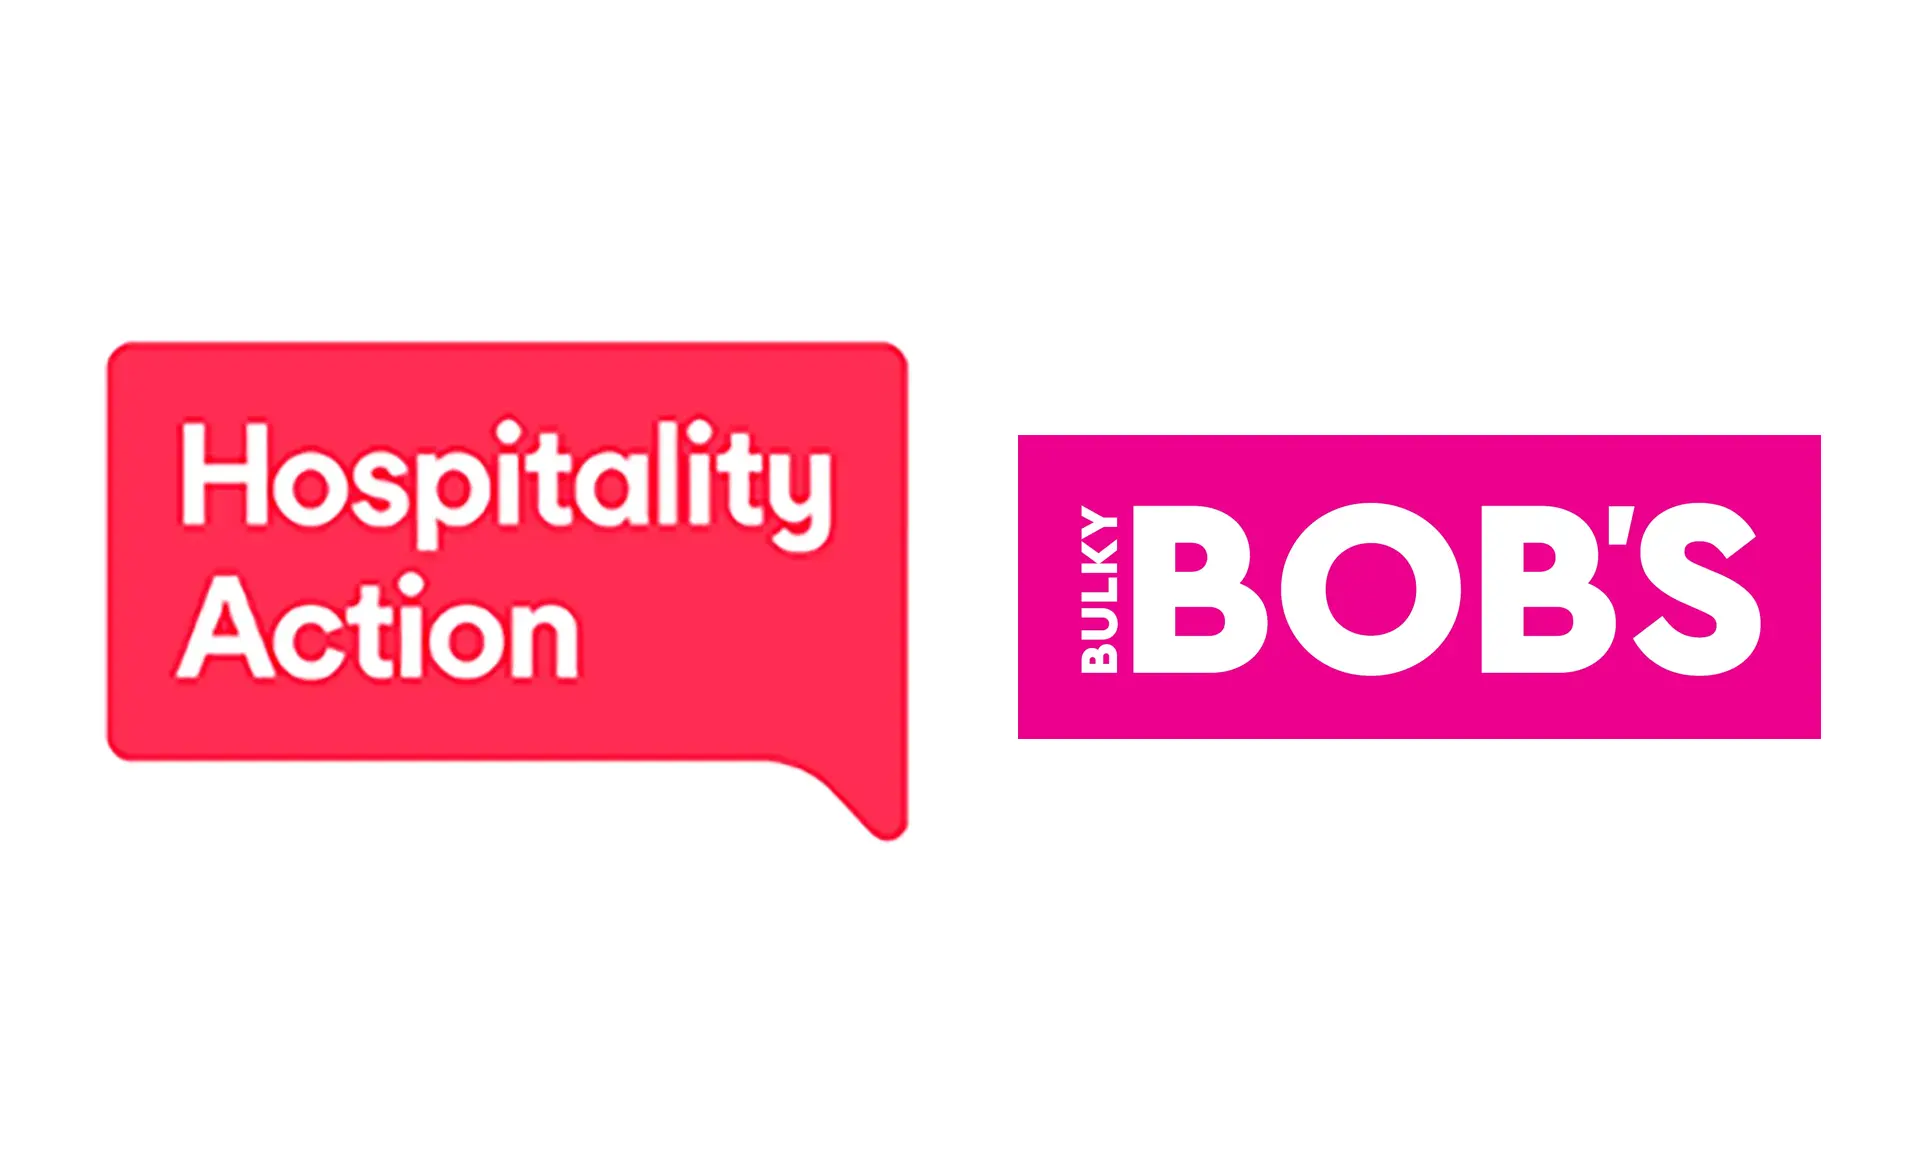 hospitality action and bulky bobs logos